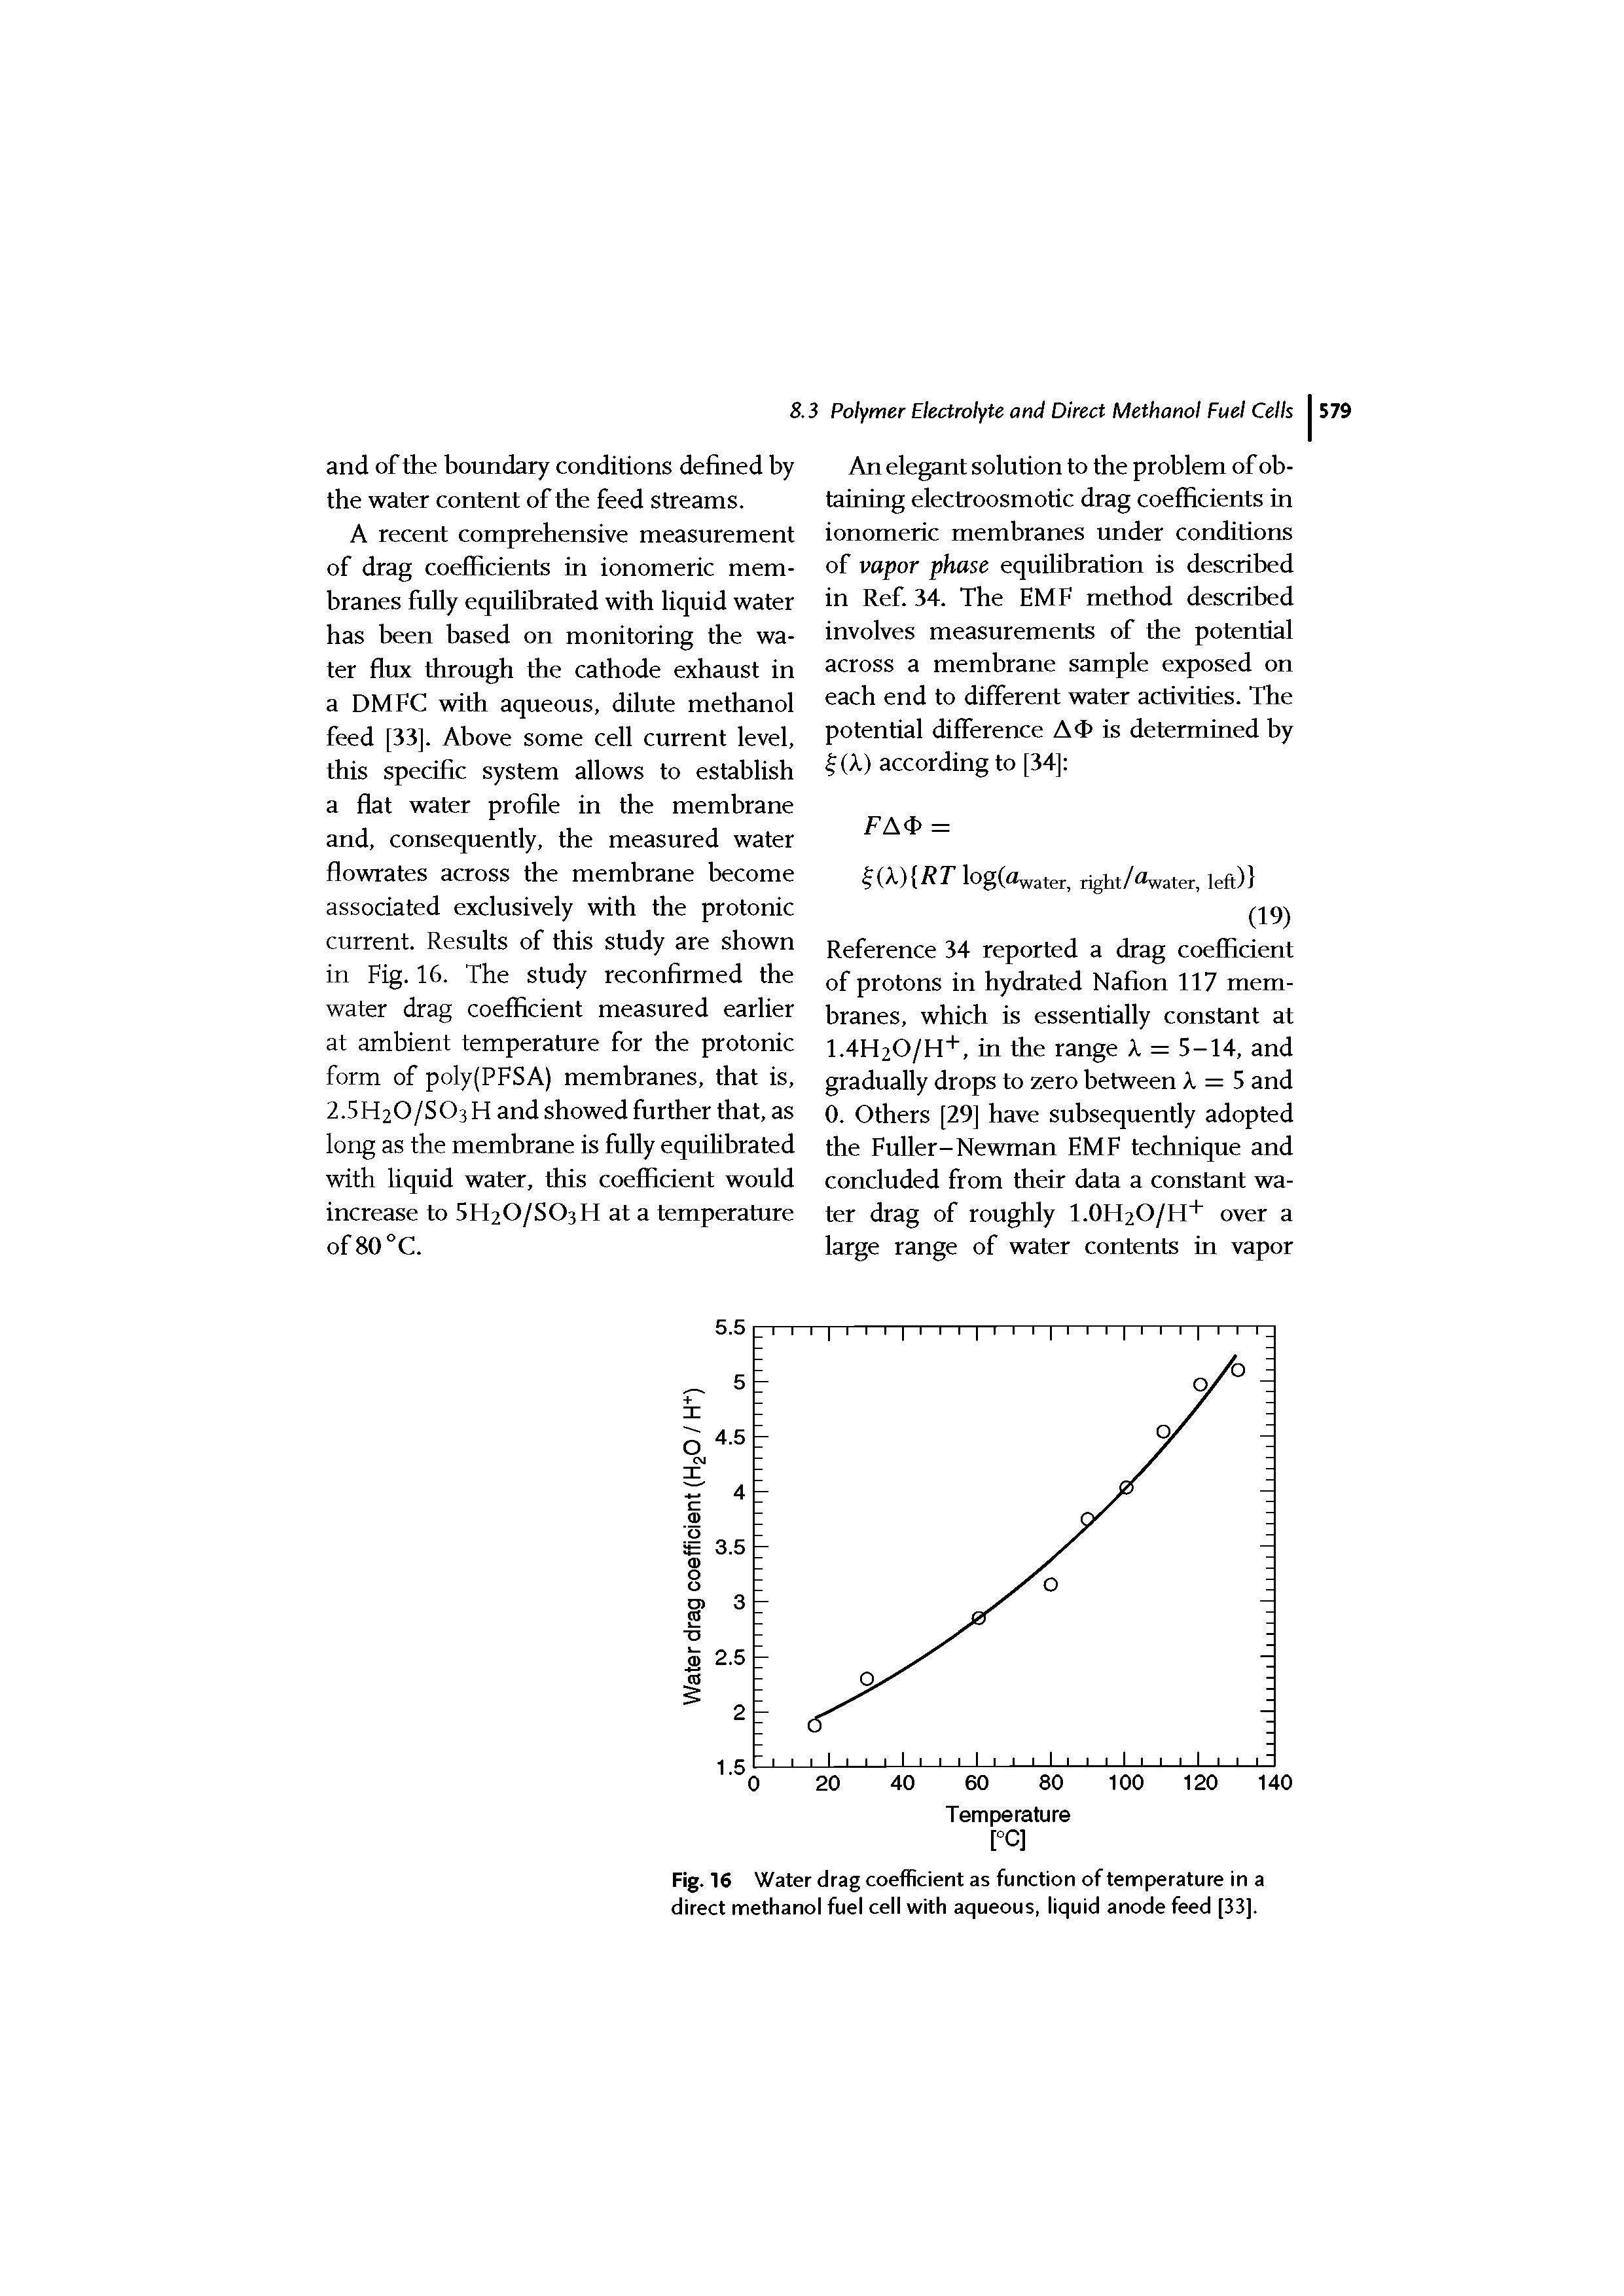 Fig. 16 Water drag coefficient as function of temperature in a direct methanol fuel cell with aqueous, liquid anode feed [33].